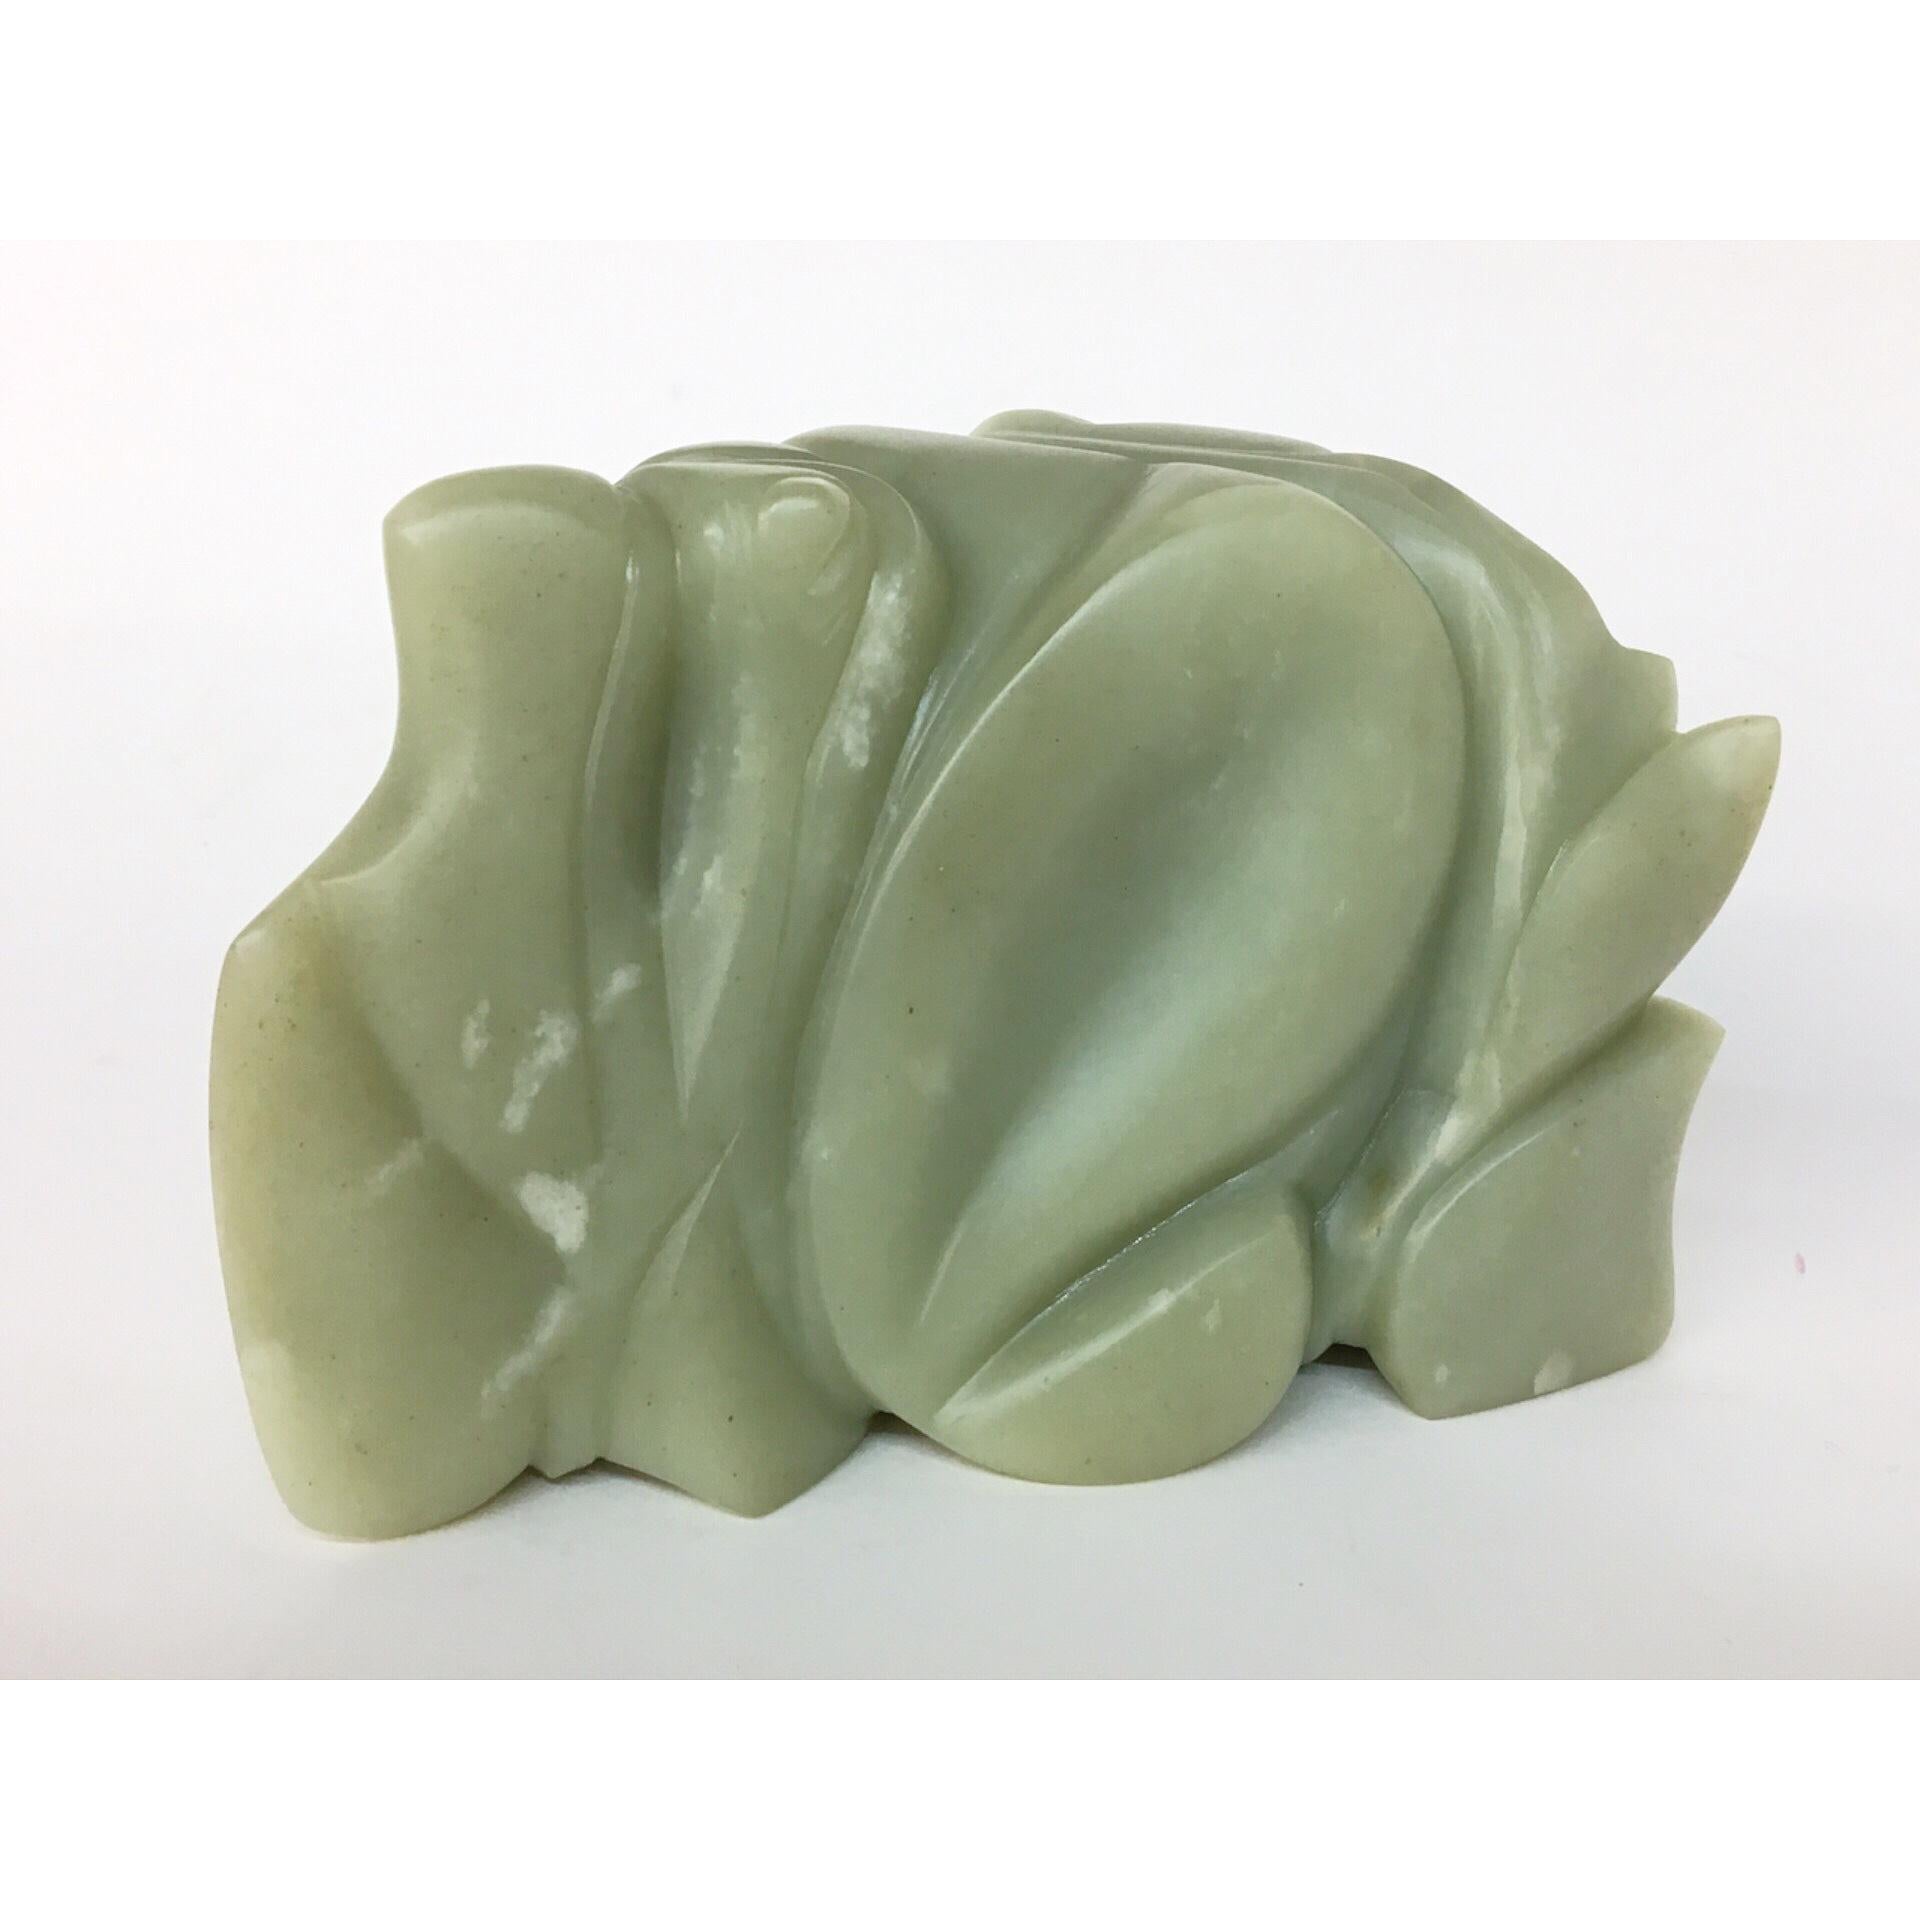 TANGLE Soapstone Sculpture 6 1/2 × 4 × 3 inch by Melanie Newcombe 1